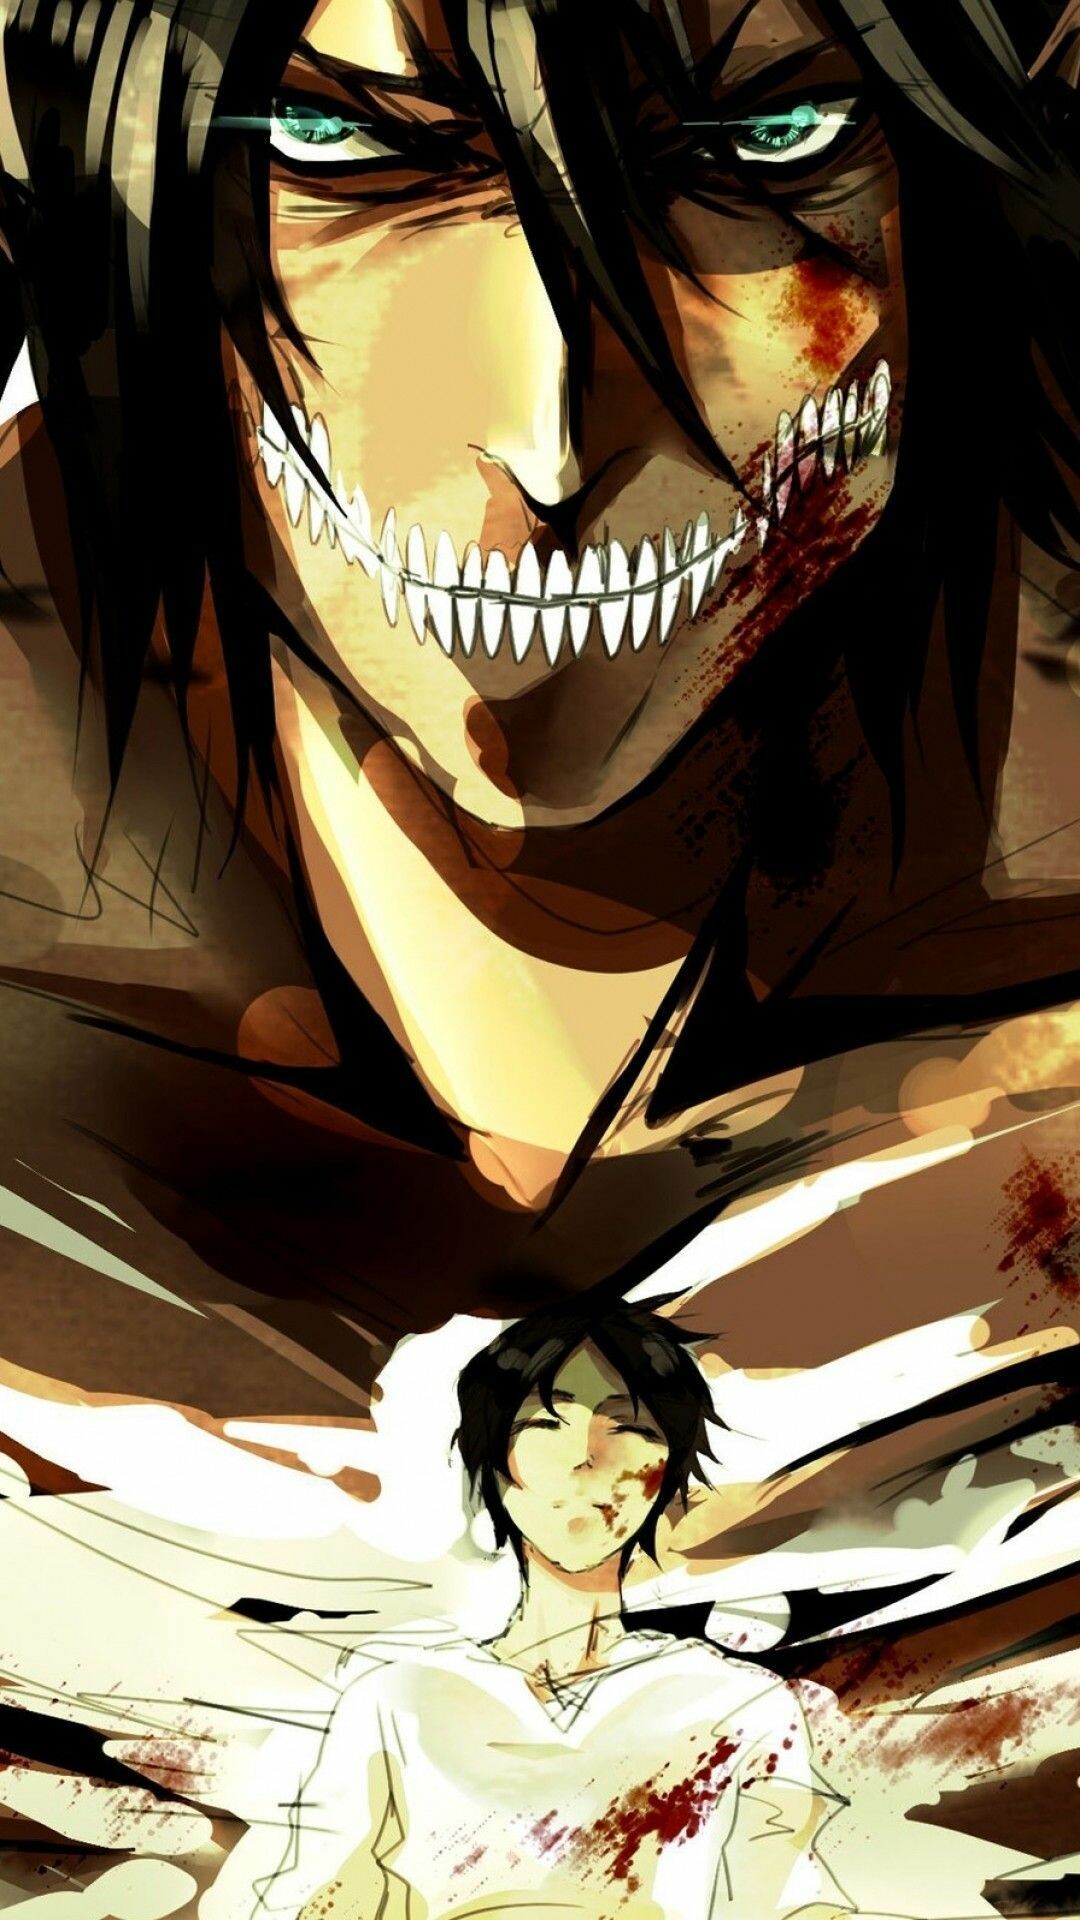 Attack on Titan (TV Series): Eren Jaeger, A teenager who swears revenge on enormous humanoid creatures. 1080x1920 Full HD Background.